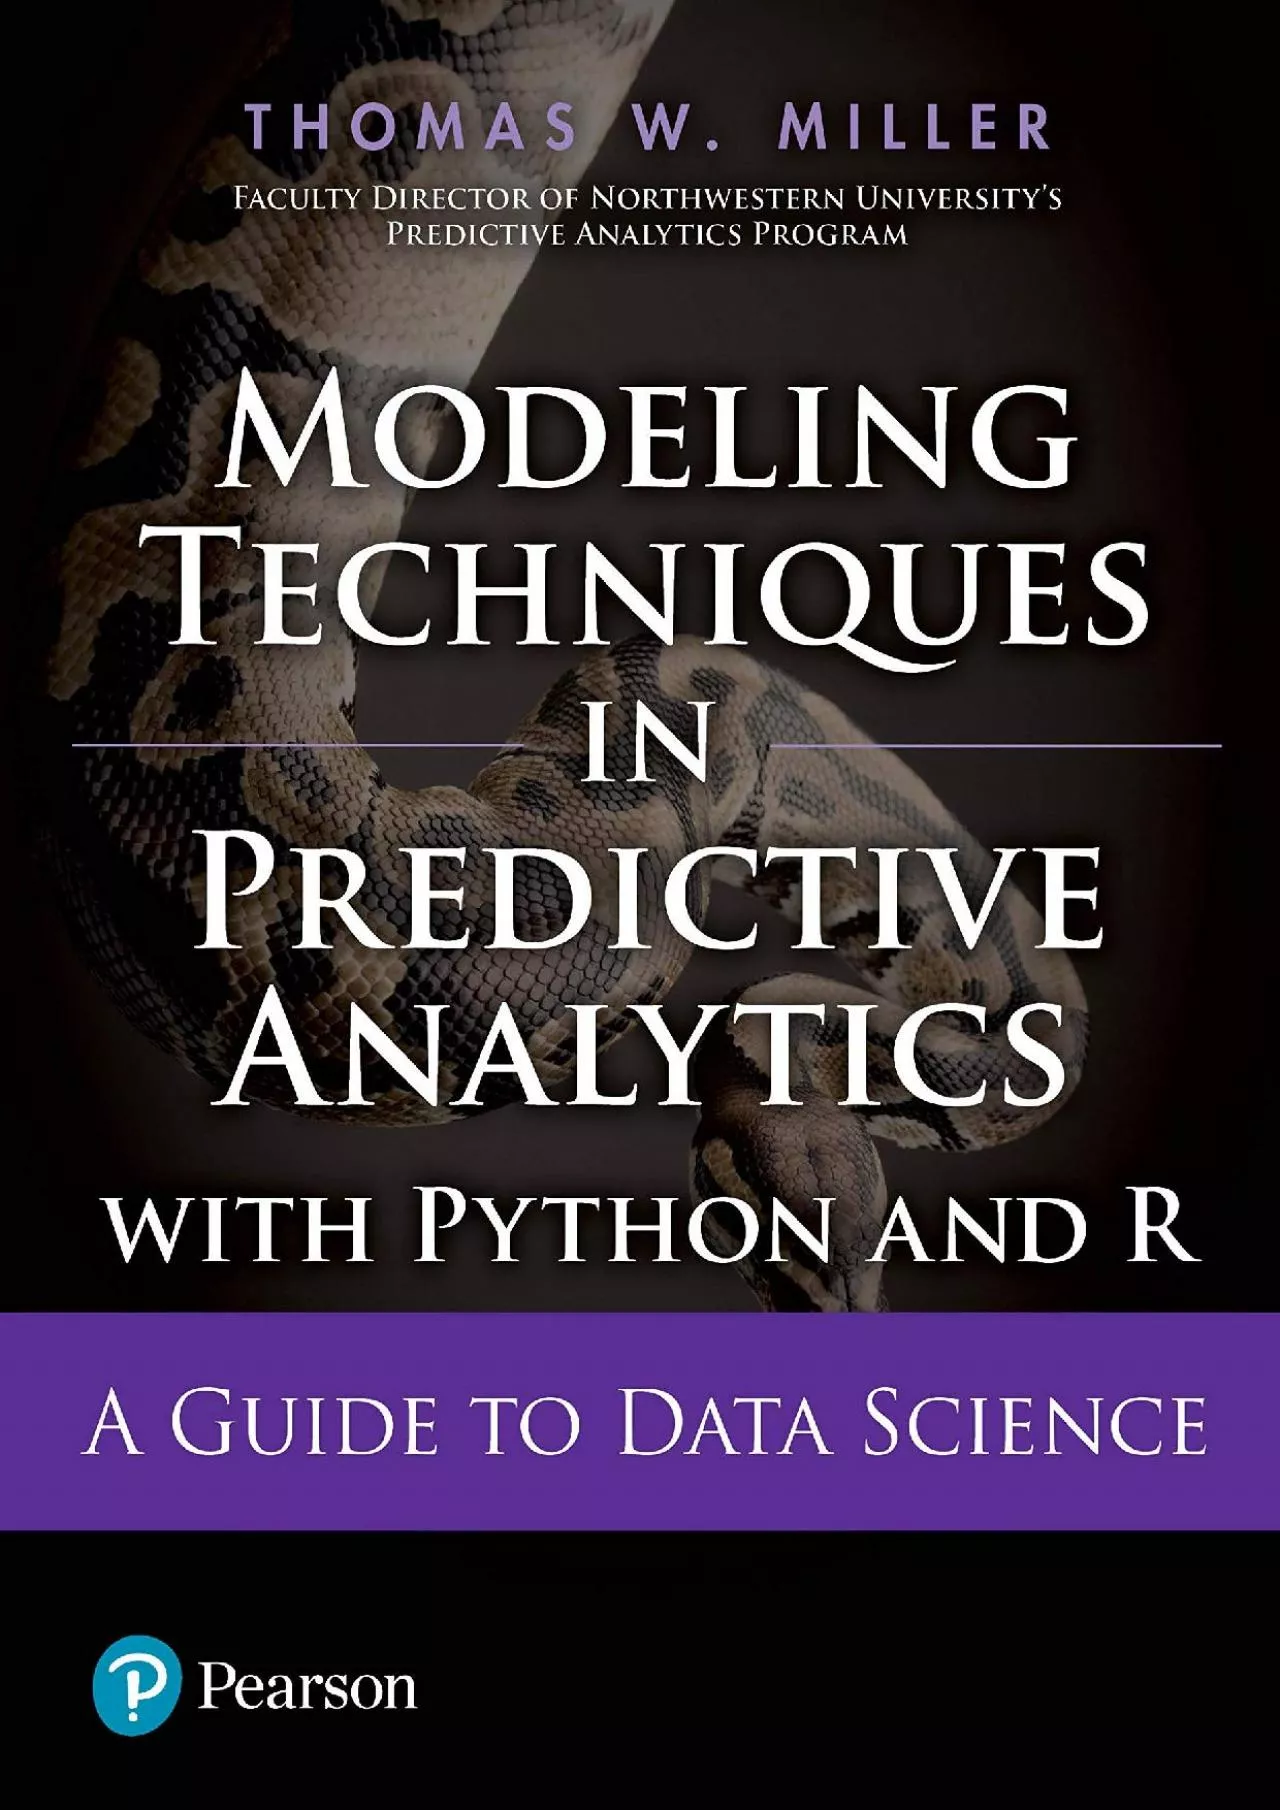 [eBOOK]-Modeling Techniques In Predictive Analytics With Python And R: A Guide To Data